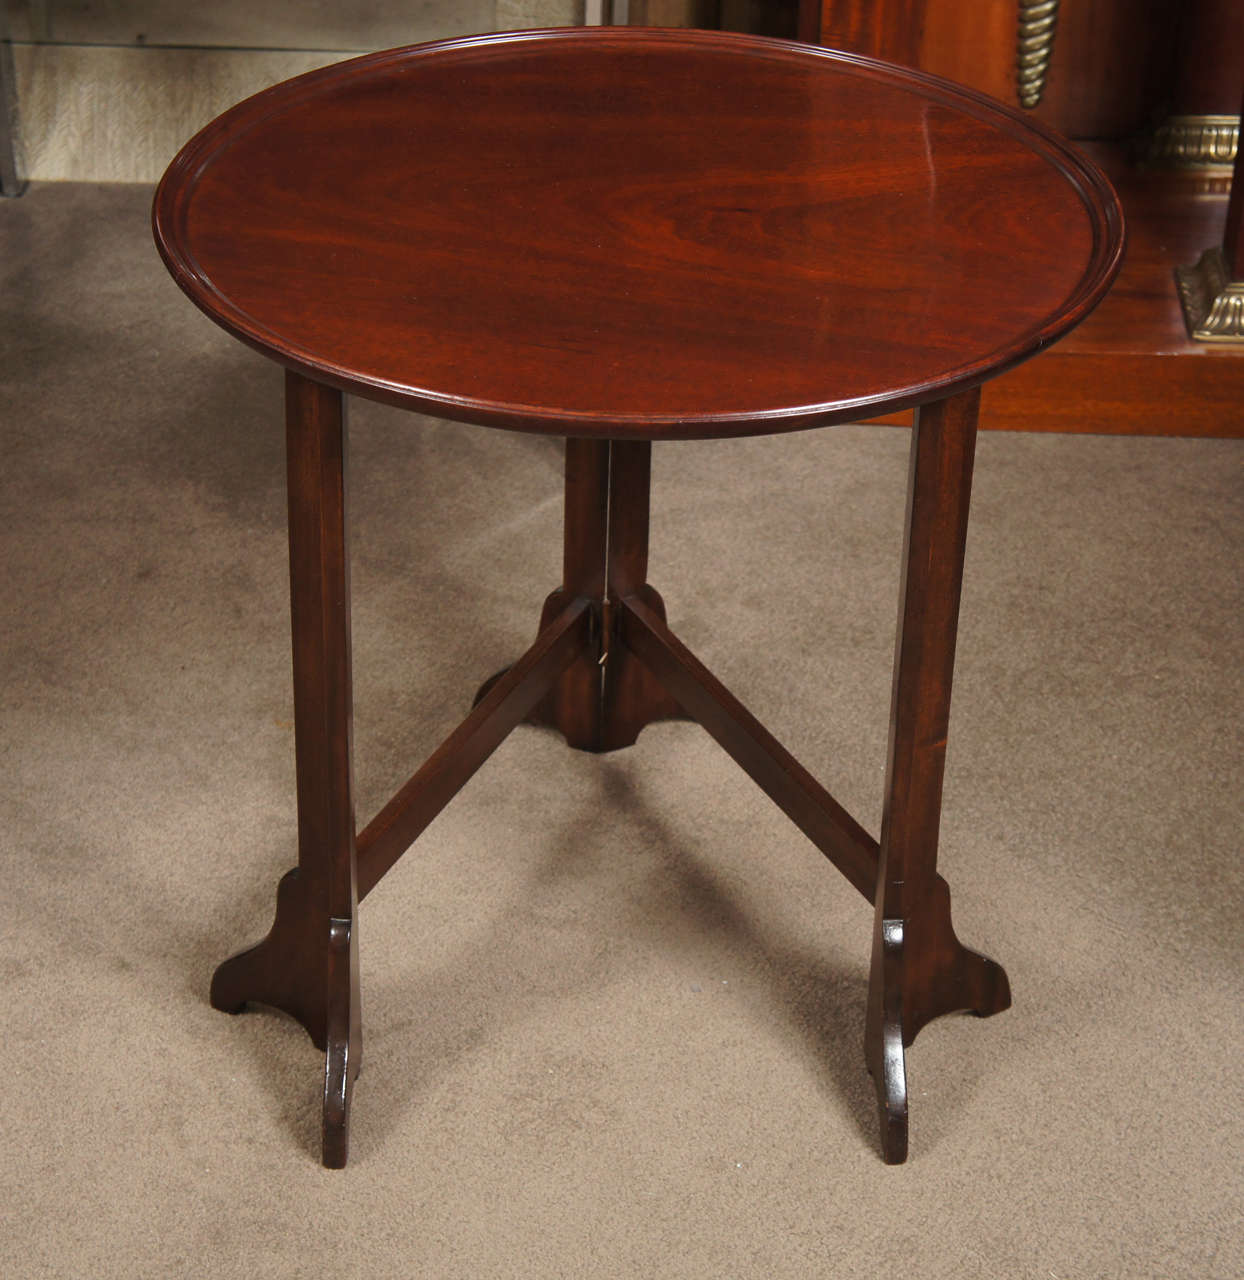 George III style mahogany tray top/ folding side table - late 19th Century.